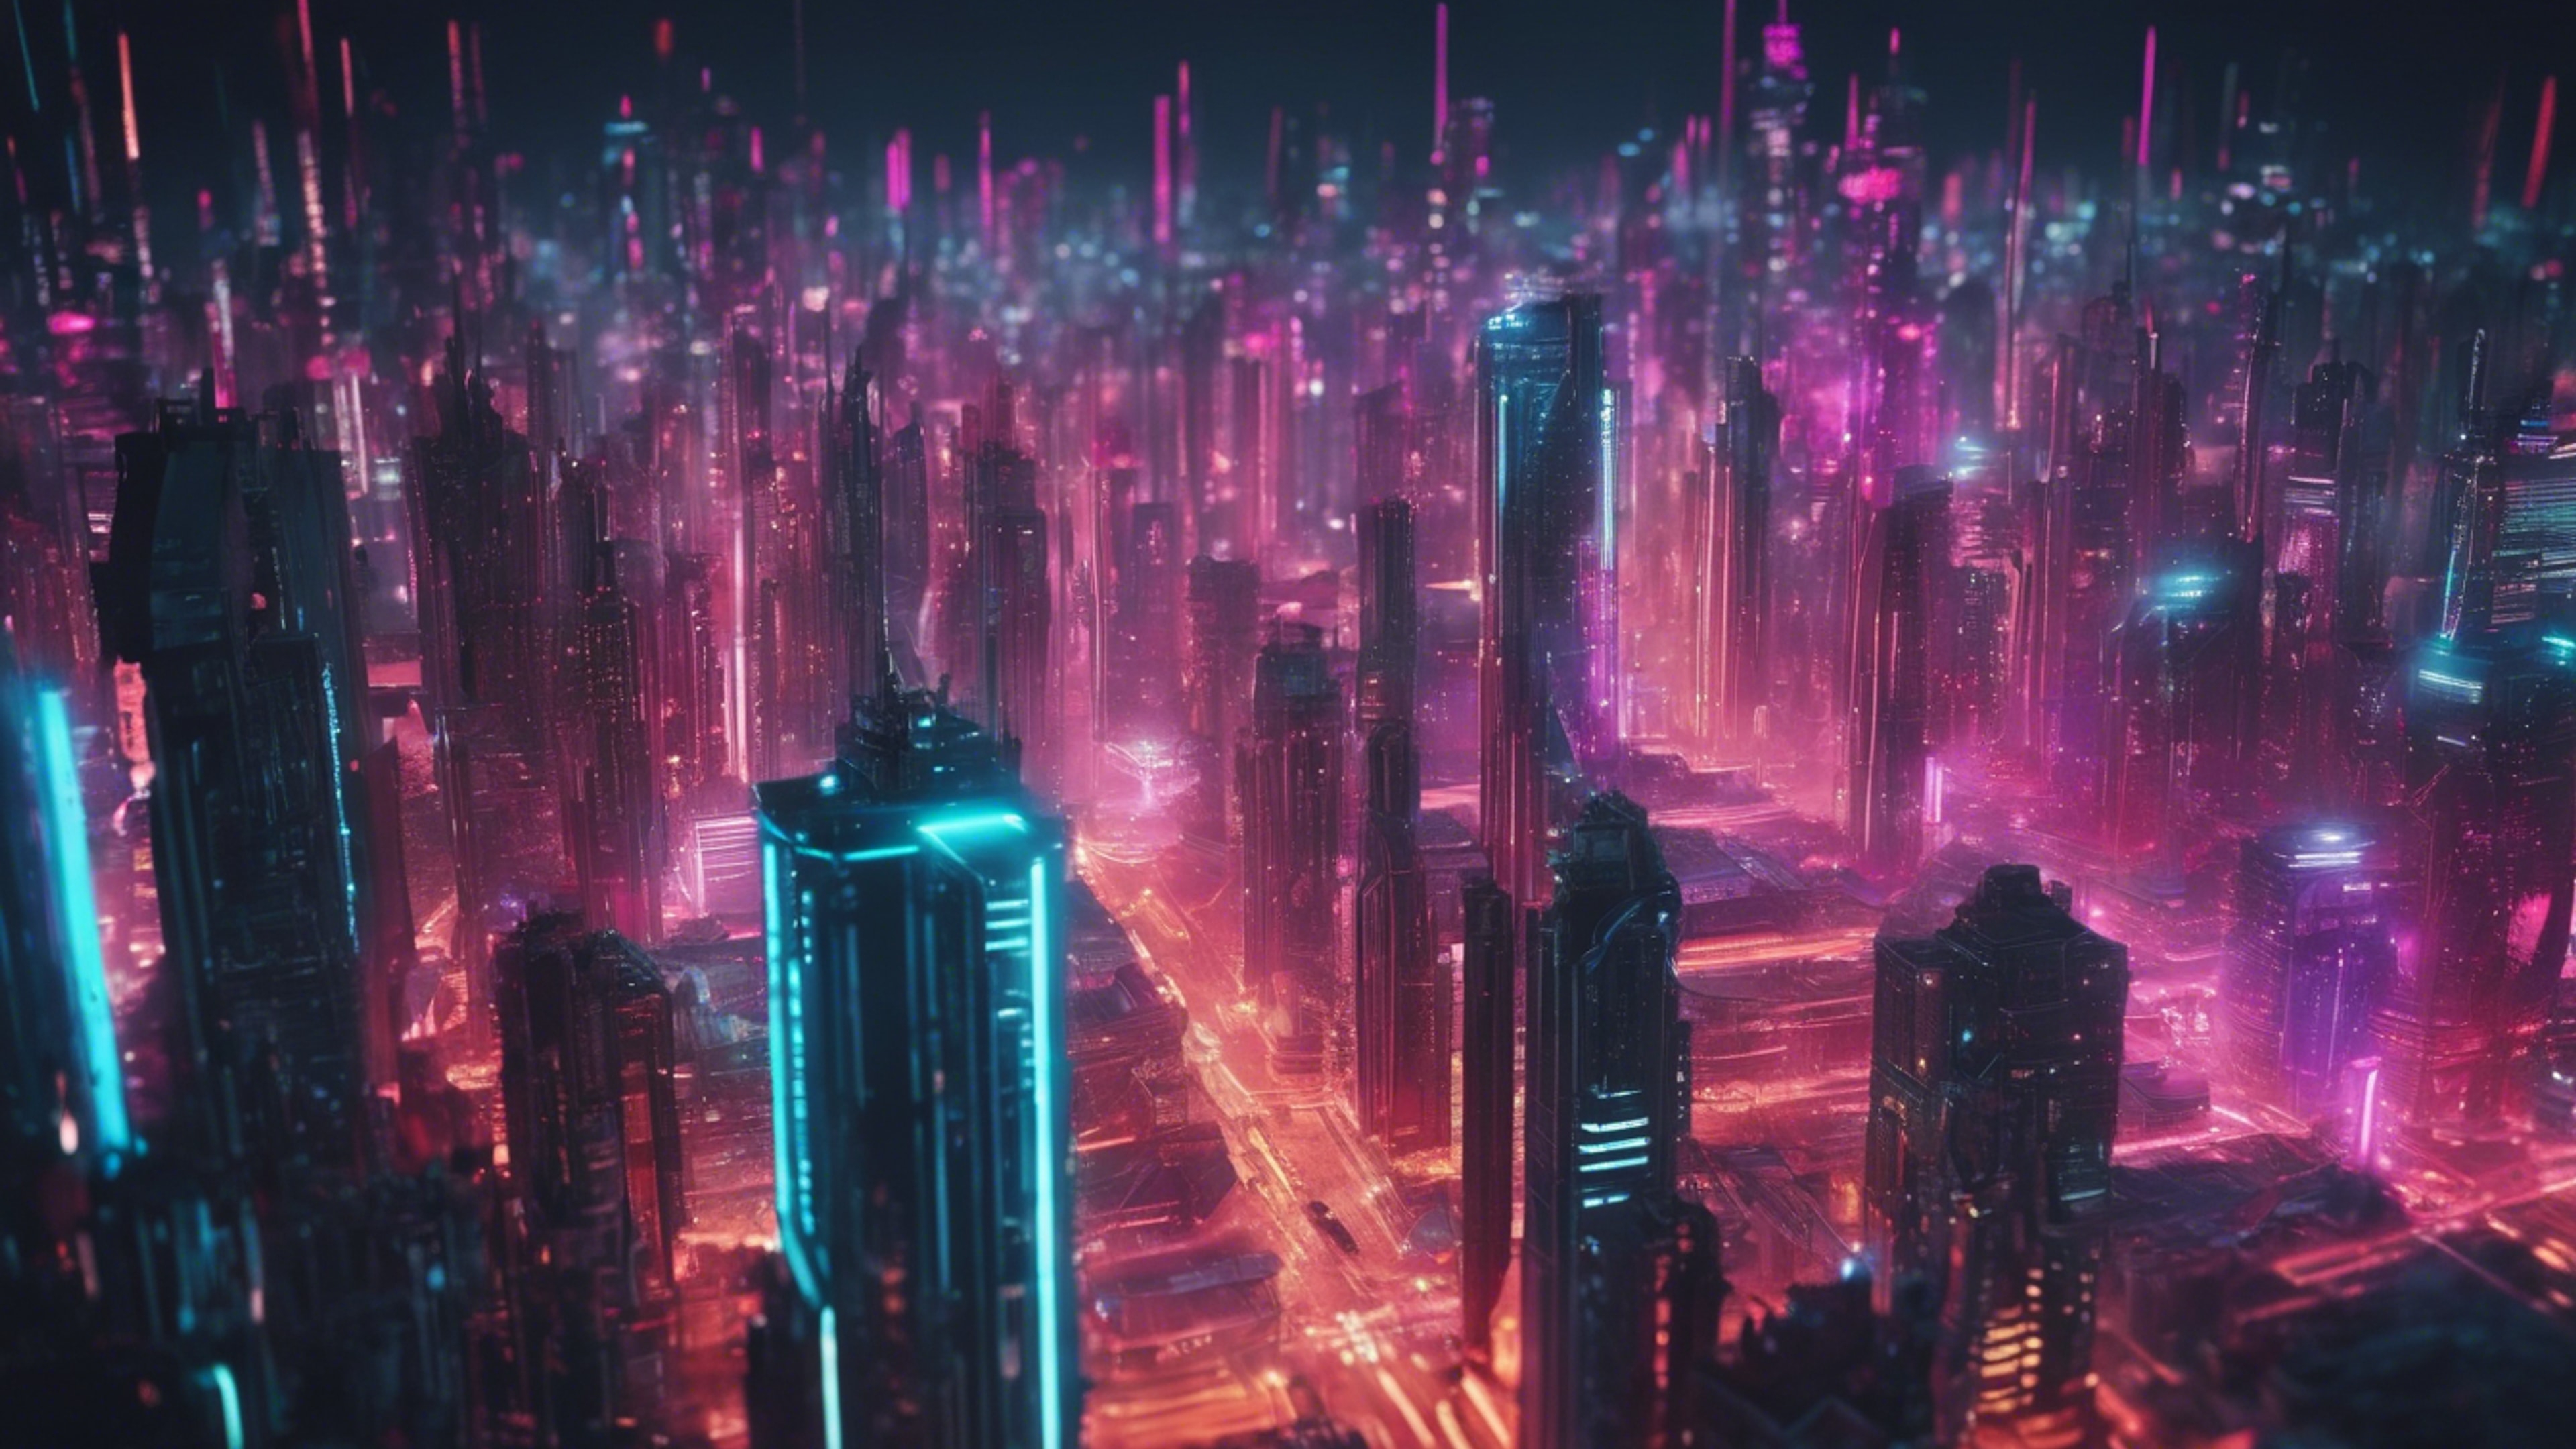 An abstract rendition of a cyberpunk city skyline lit up with neon lights. Обои[be51173c54ff4f4dbec8]